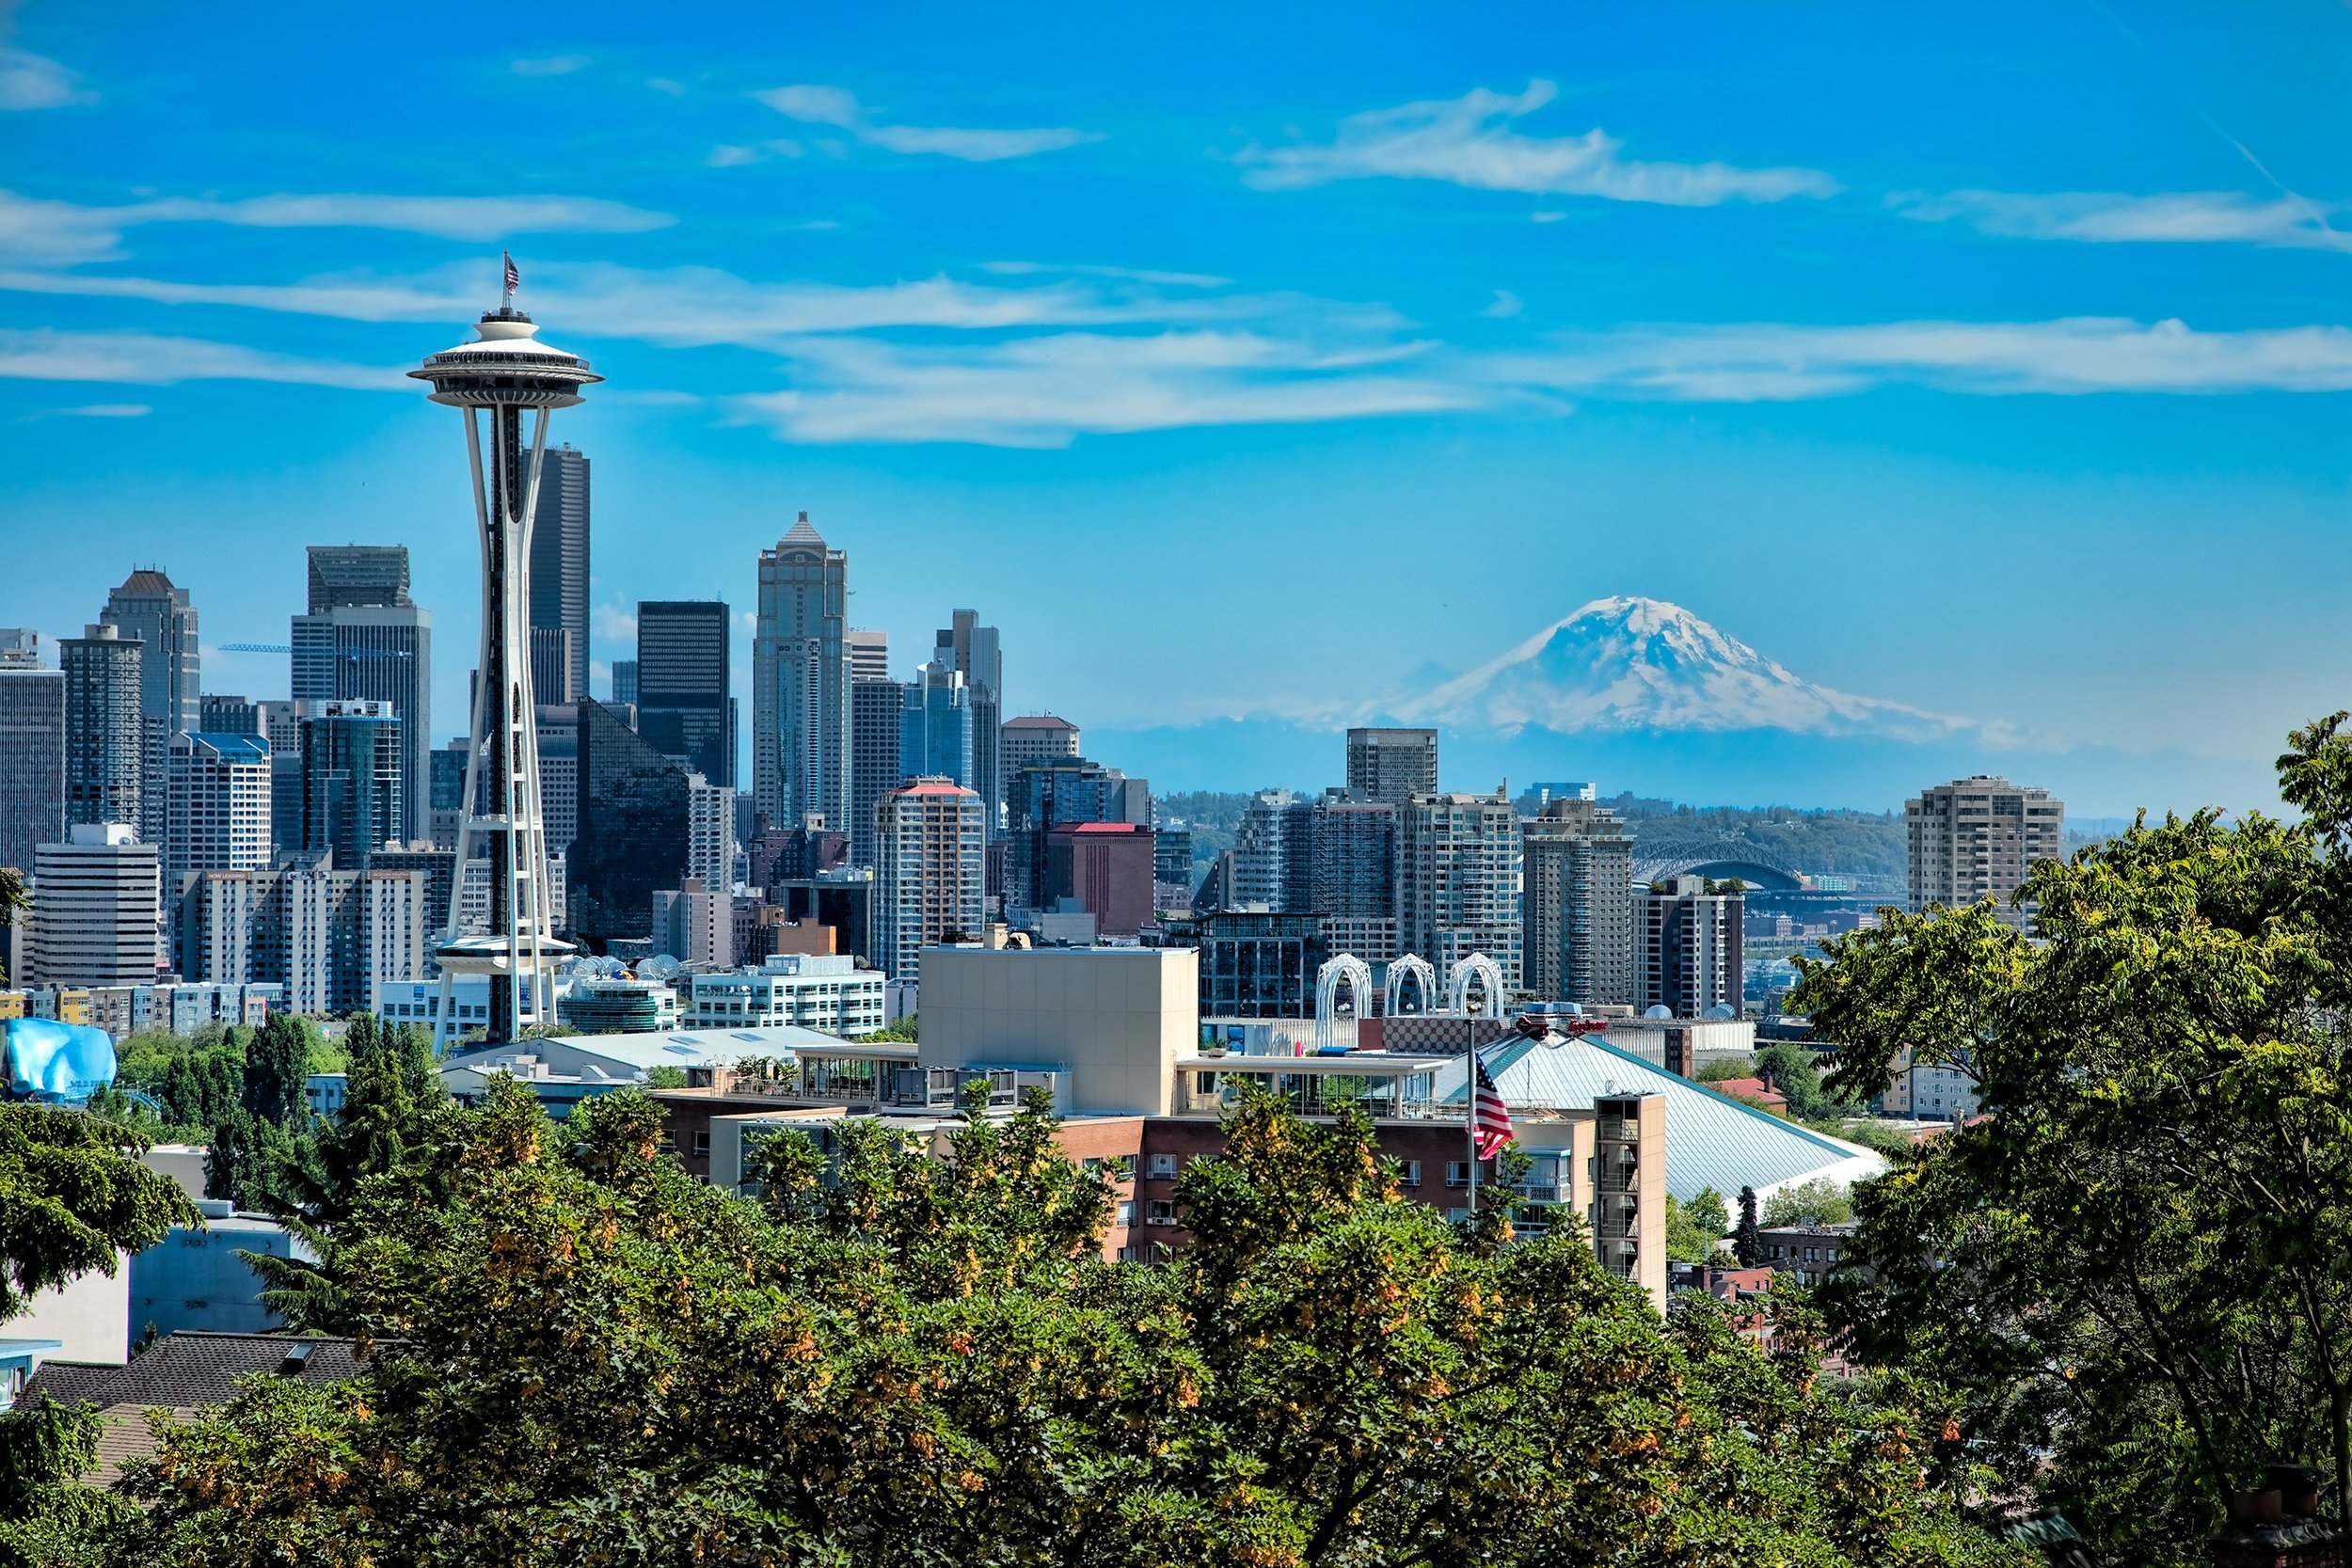 <p>If you're not a fan of spending a small fortune on a congested summer getaway, Seattle is best avoided. The Space Needle, public market, and oysters are wonderful reasons to visit, just not at the height of tourist season.</p>